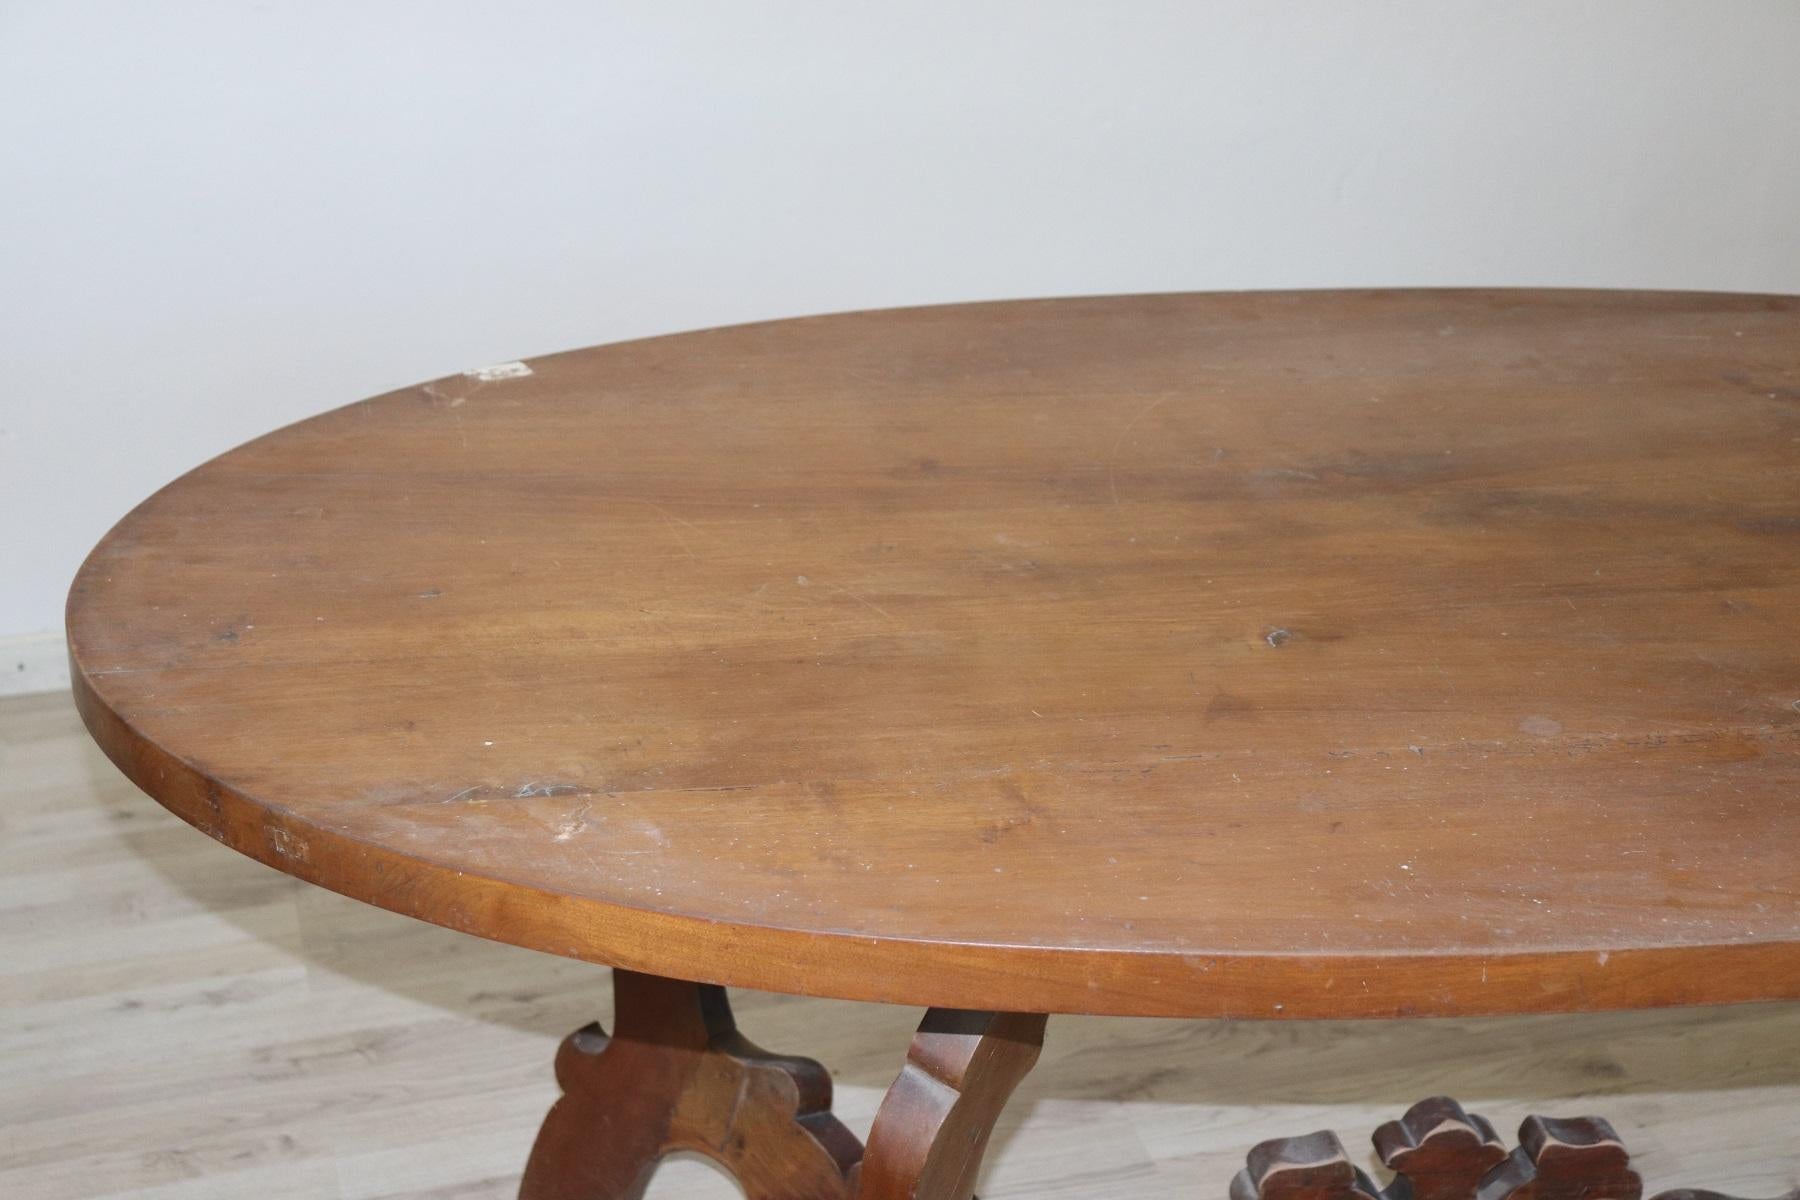 20th Century Italian Fratino Walnut Wood Oval Table with Lyre-Shaped Legs For Sale 3